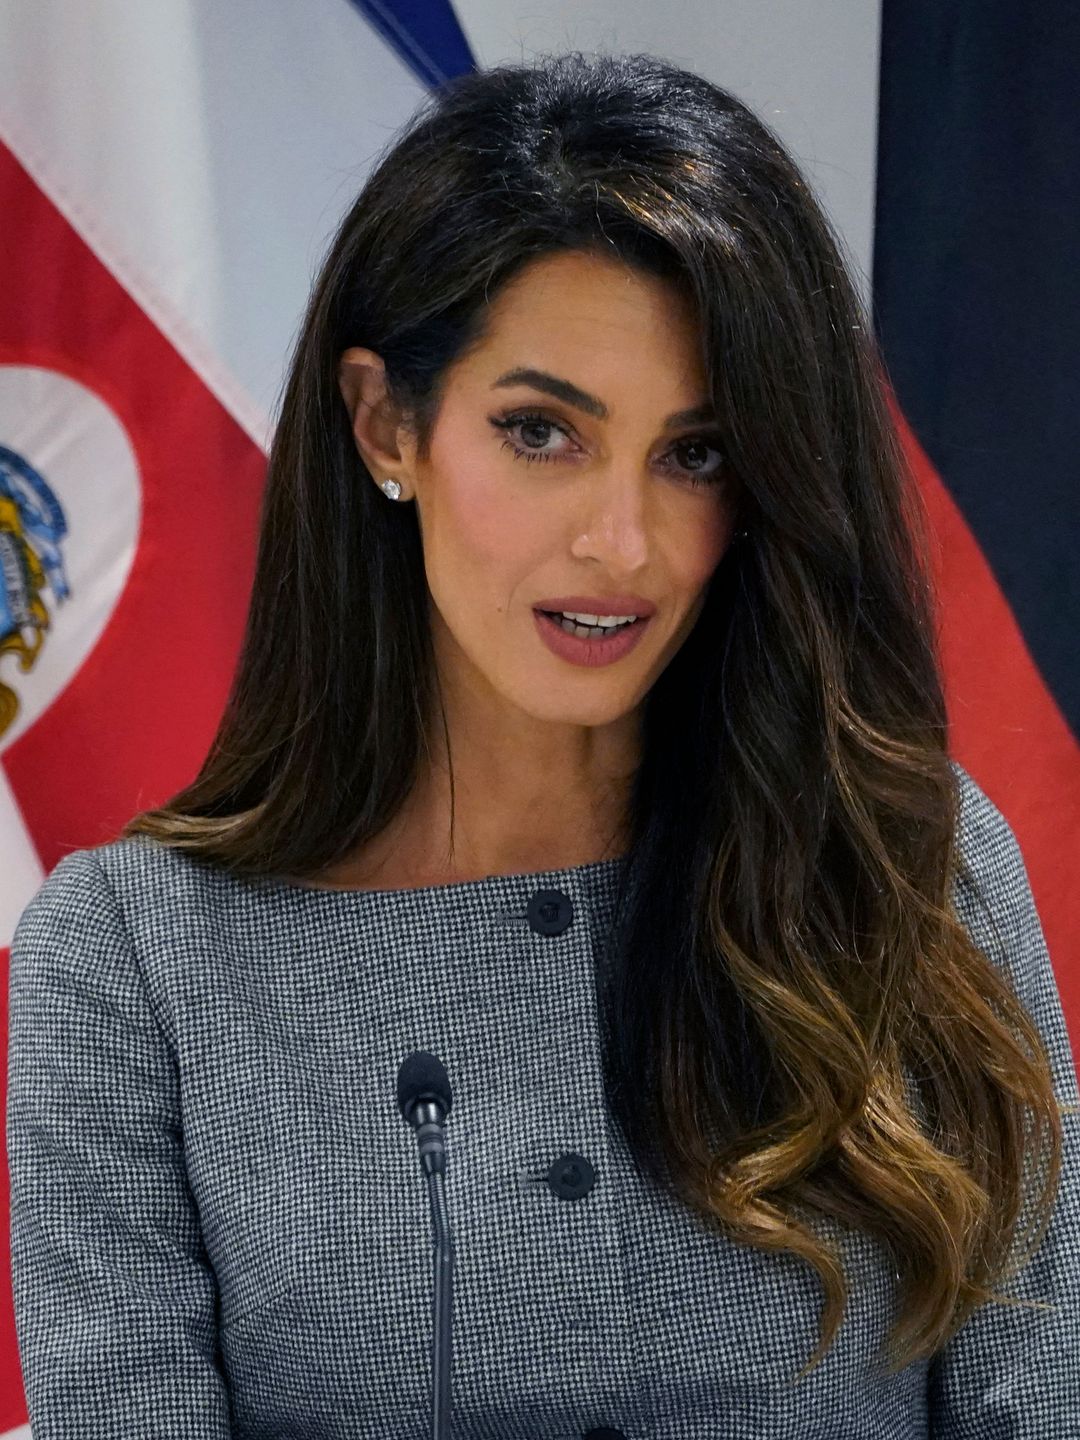 Amal Clooney, a British-Lebanese lawyer, activist, and philanthropist who specializes in international law and human rights, speaks at the High-Level Dialogue on the Declaration Against Arbitrary Detention in State-to-State Relations, in New York City, September 20, 2023, on the sidelines of the 78th United Nations General Assembly. (Photo by TIMOTHY A. CLARY / POOL / AFP) (Photo by TIMOTHY A. CLARY/POOL/AFP via Getty Images)